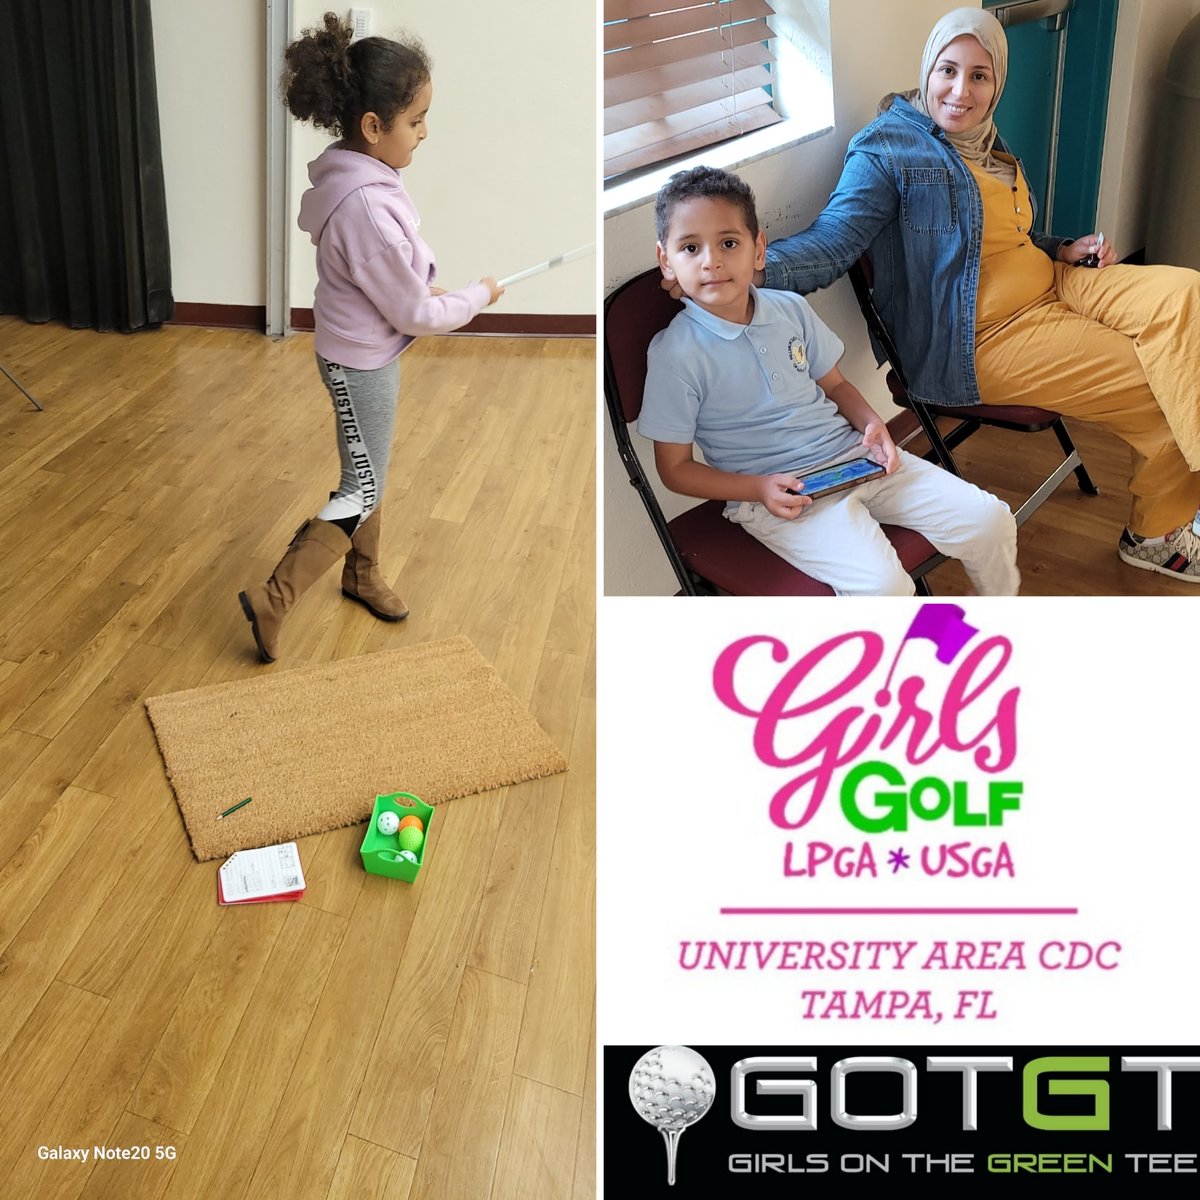 Tampa: University Area CDC & Girls On The Green Tee provide 'free' golf lessons to girls in partnership with Women of Color Golf and Girls on the Green Tee.

“Golf is a family affair.'

#Changemakers 
#Girlsonthegreentee
#Womenofcolorgolf
#makegolfyourthing
@Aramco_Americas